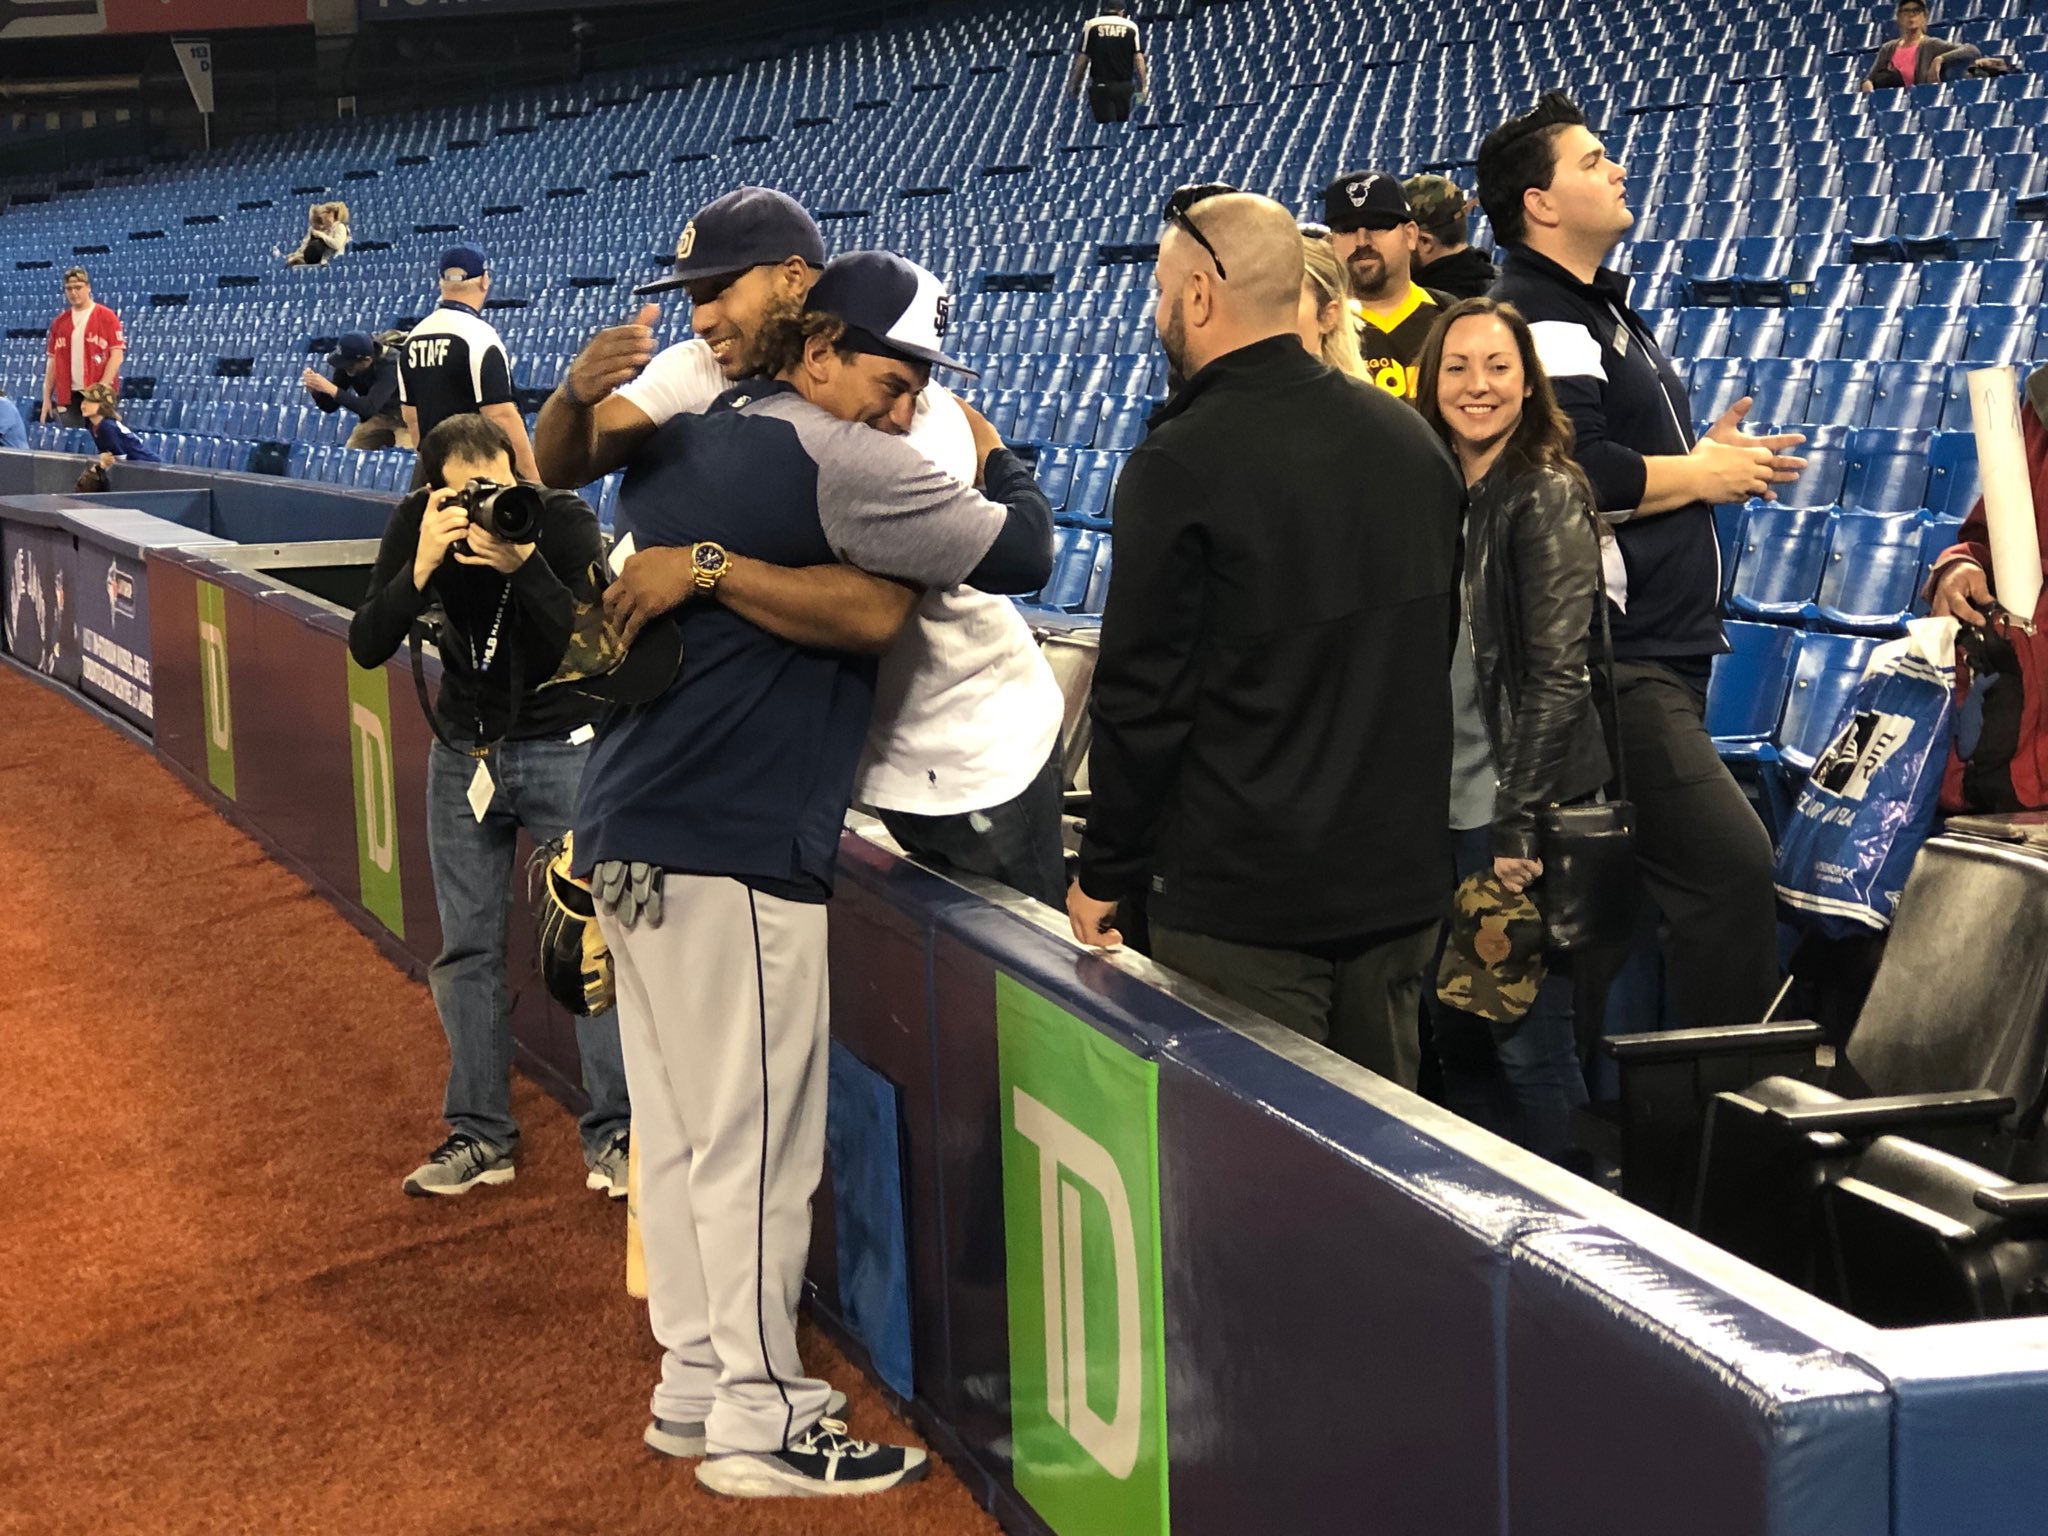 Bob Scanlan on X: Josh Naylor getting congratulatory hugs from family and  friends here to celebrate his first day in the big leagues! #WelcomeToMLB  #Padres  / X